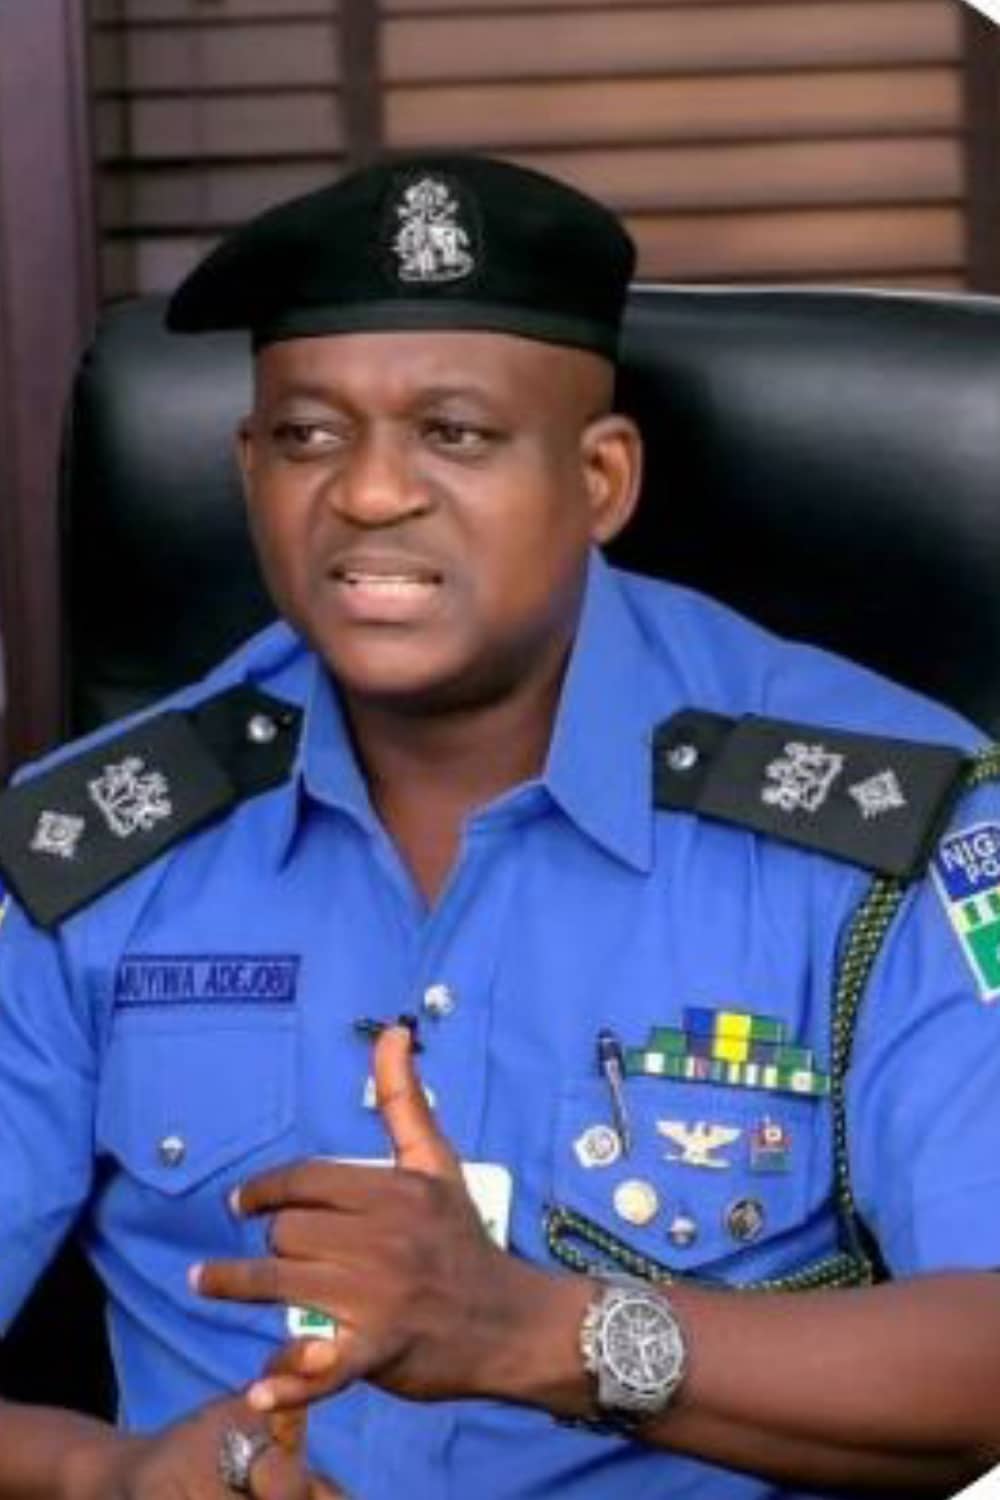 "He really deserved it"- Reactions as Police pro calls for arrest of skit maker Trinity Guy over extreme pranks